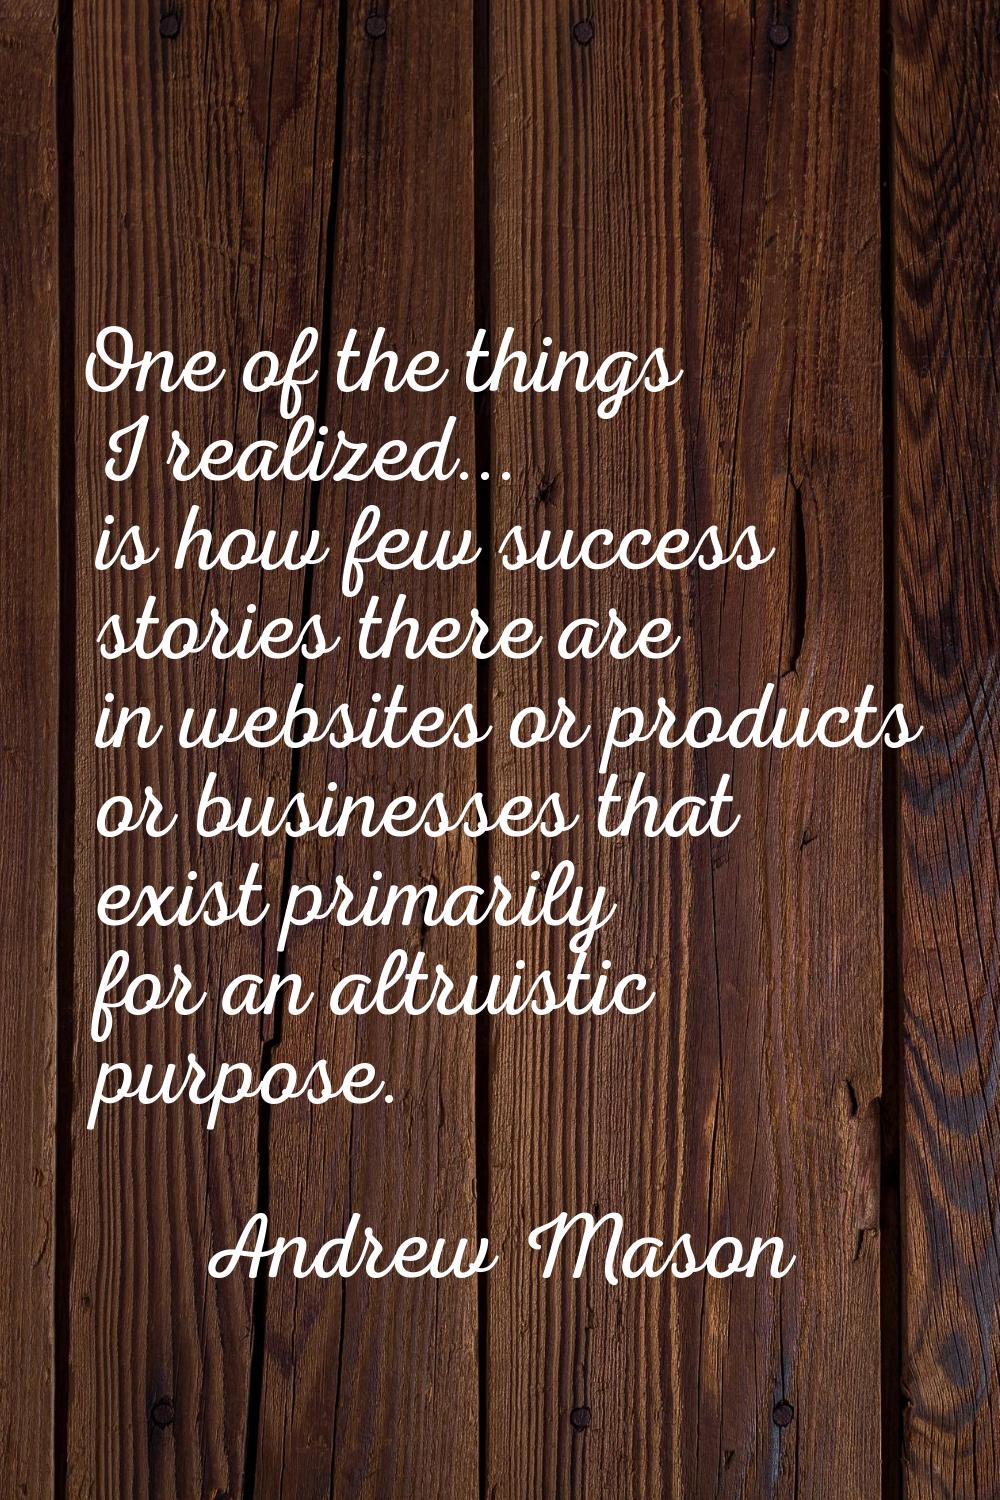 One of the things I realized... is how few success stories there are in websites or products or bus